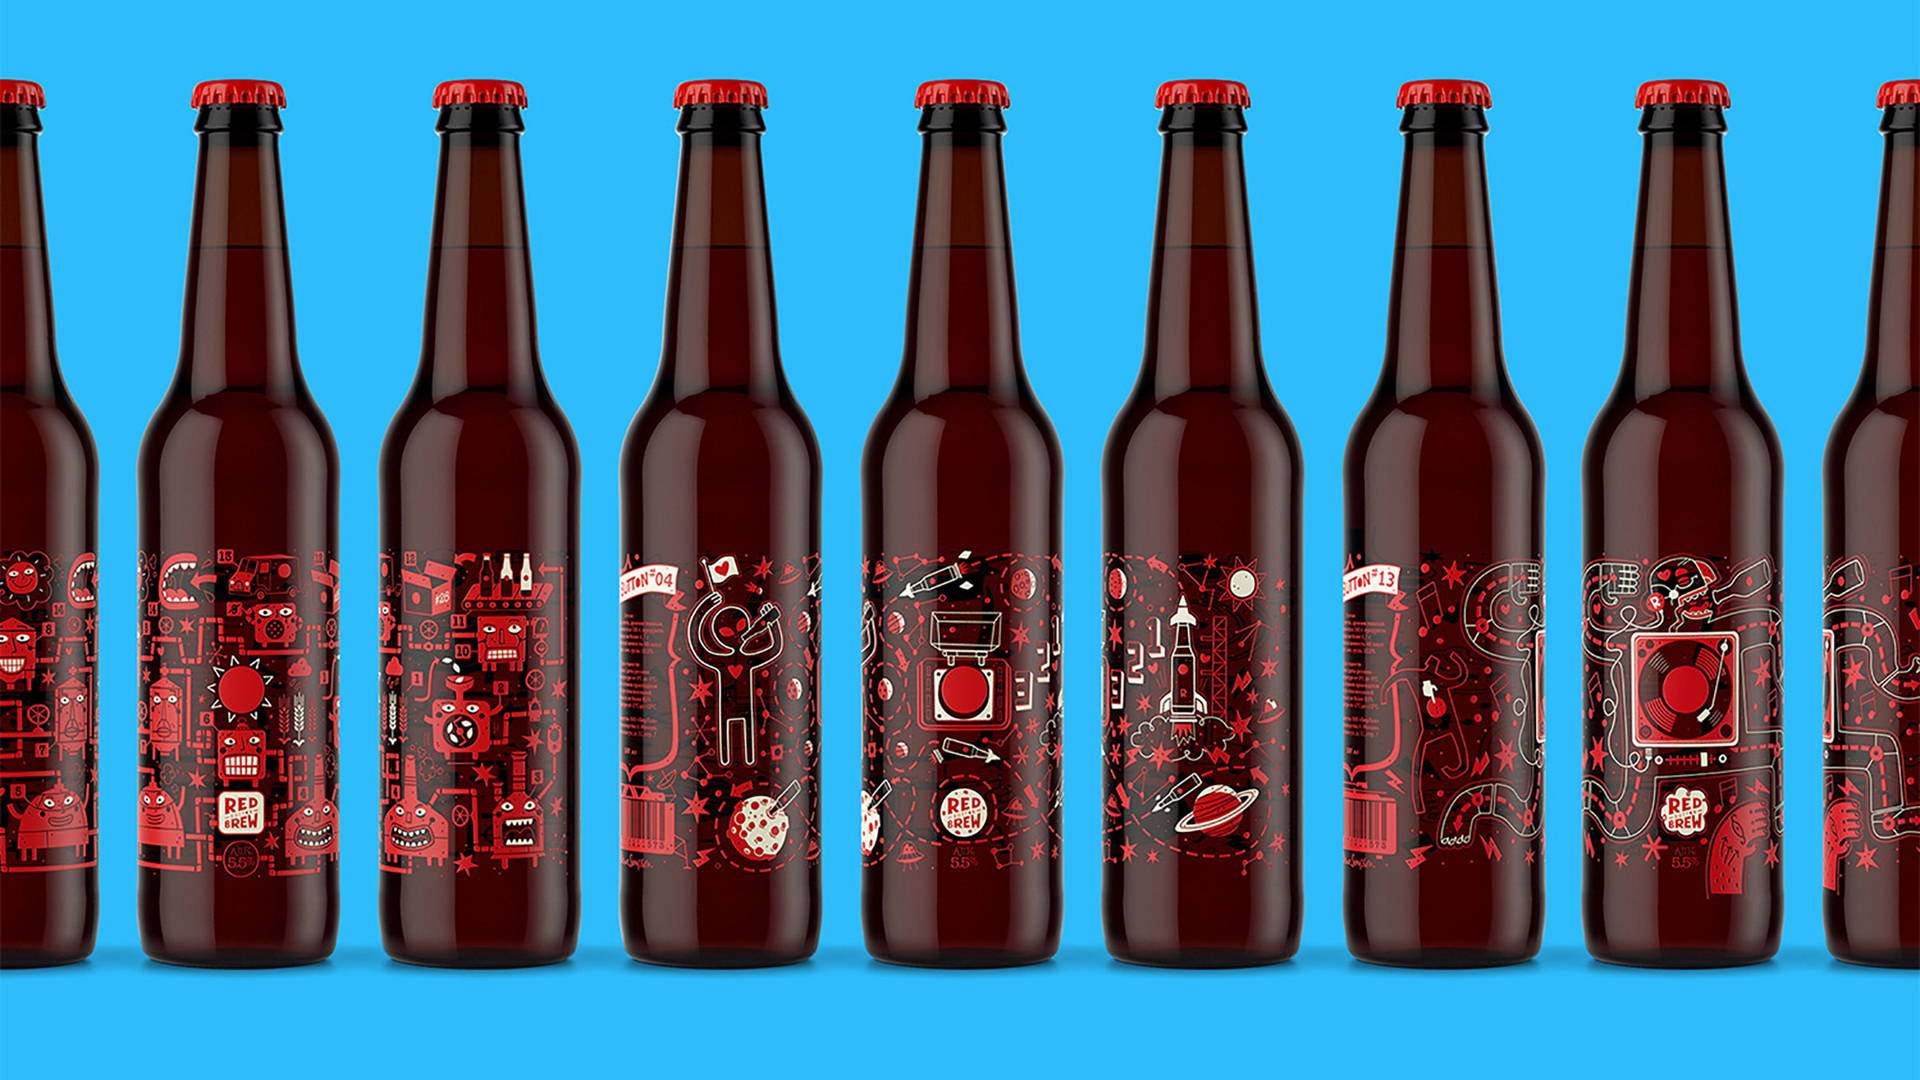 Featured image for This Moscow-Based Beer Company Dares You To Push The Red Button